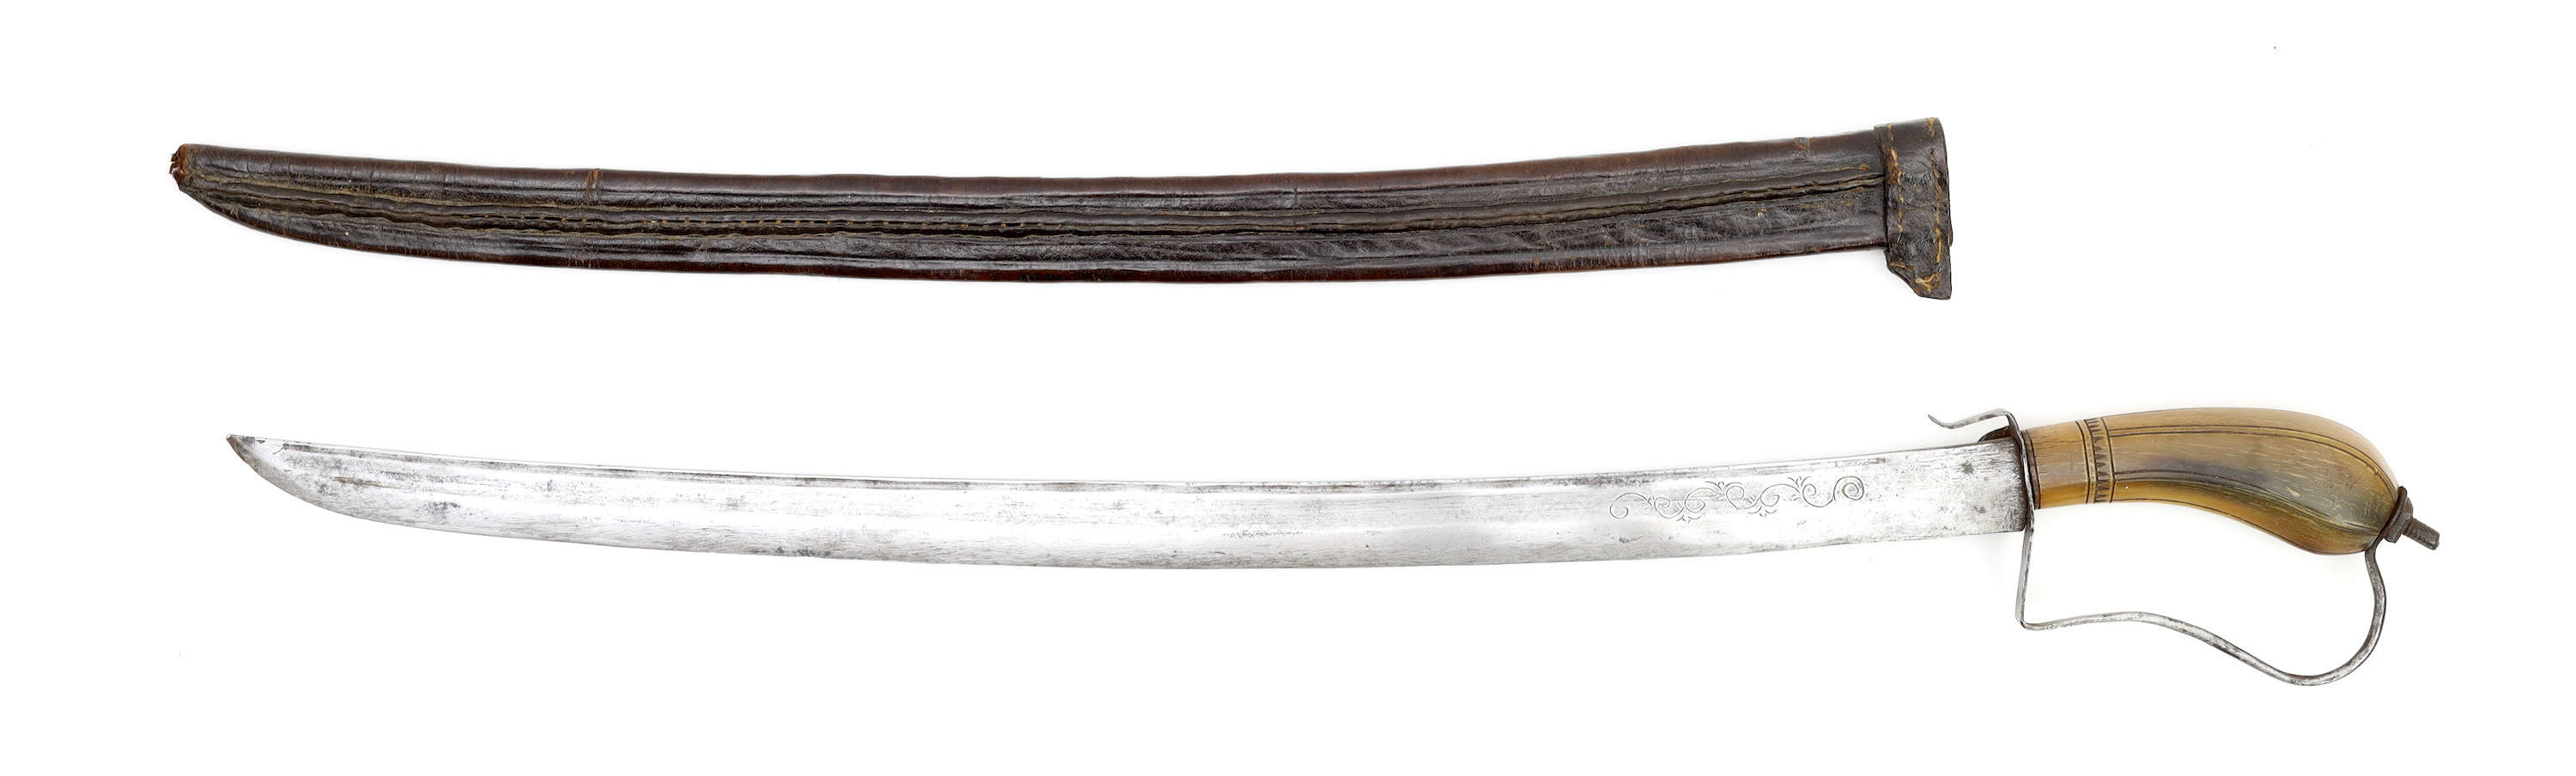 Indonesian colonial military saber